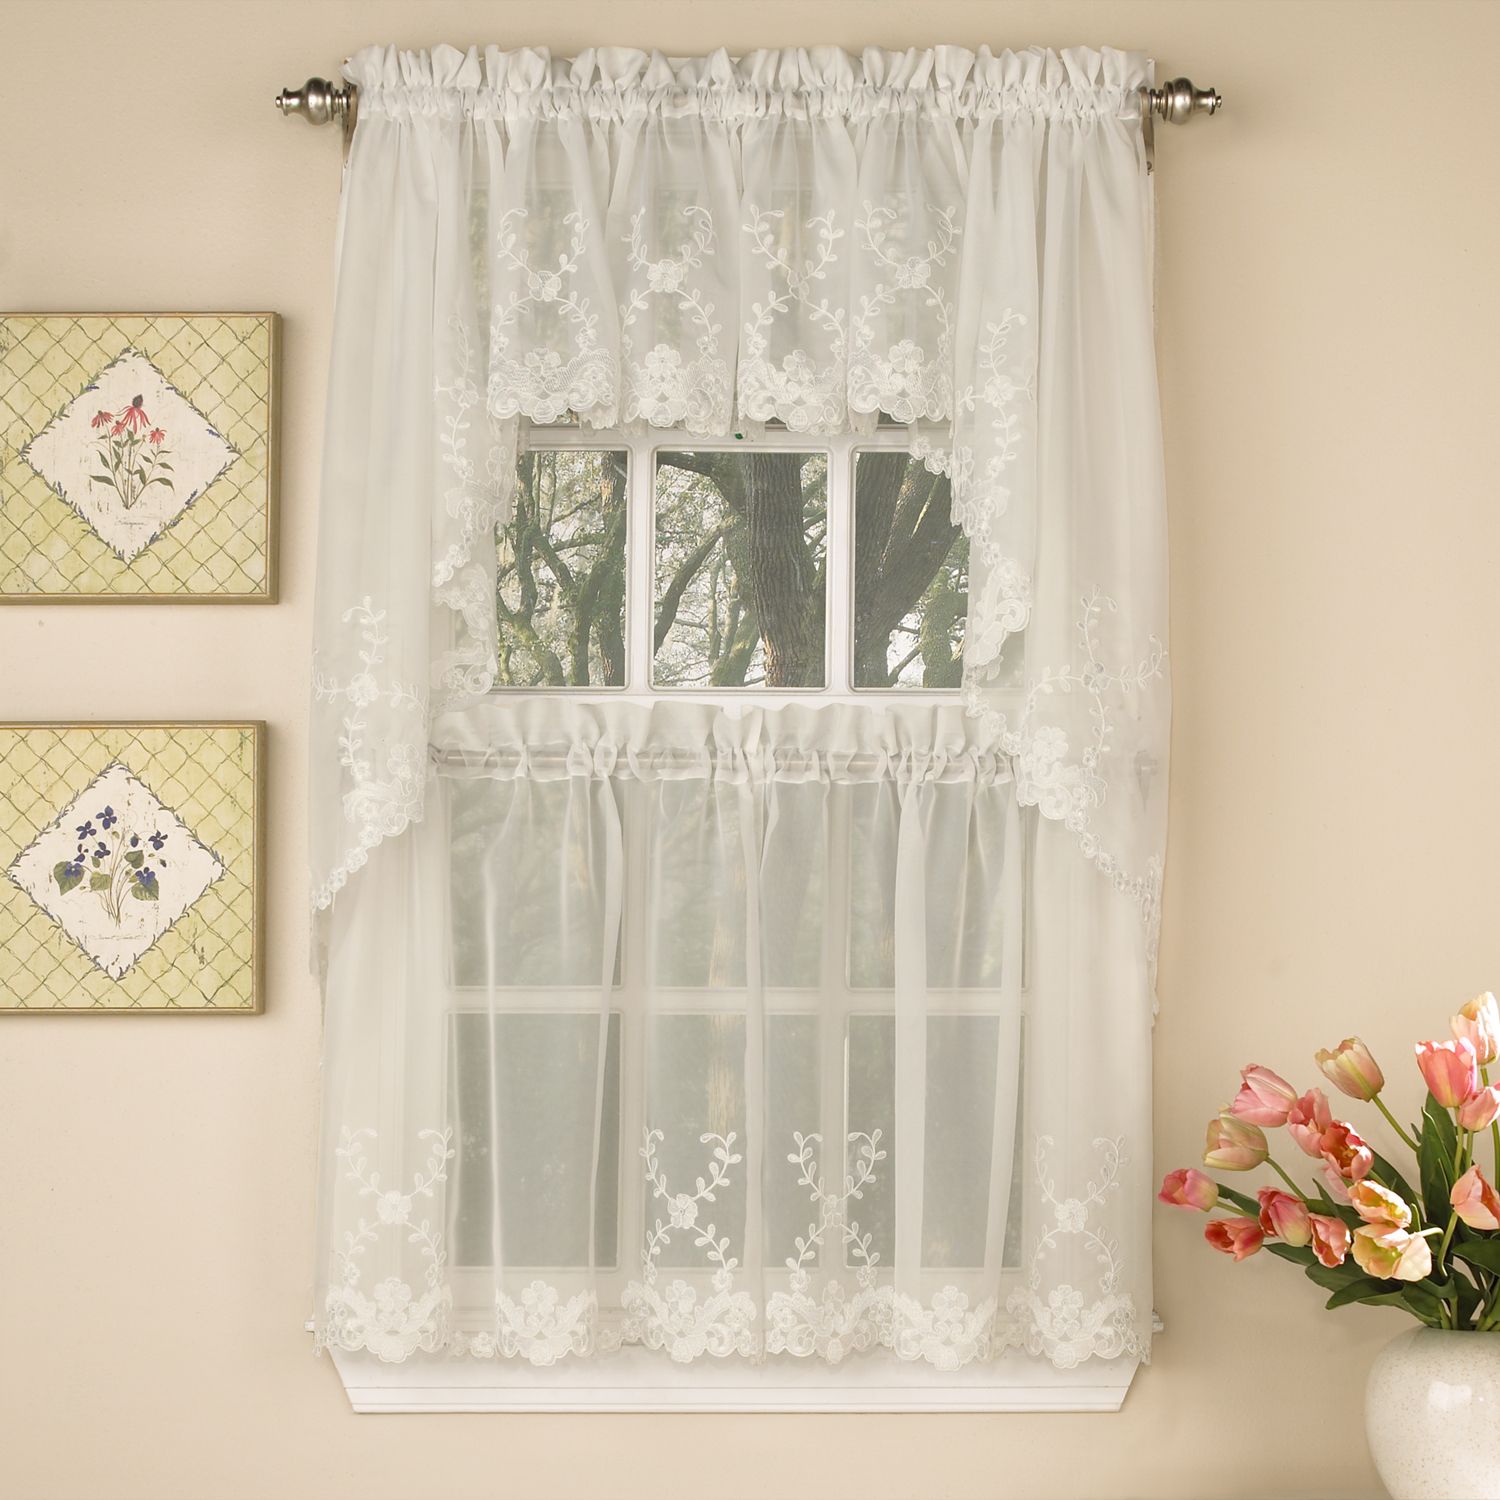 Details About Laurel Leaf Sheer Voile Embroidered Ivory Kitchen Curtains  Tier, Valance Or Swag Throughout Floral Embroidered Sheer Kitchen Curtain Tiers, Swags And Valances (Photo 3 of 20)